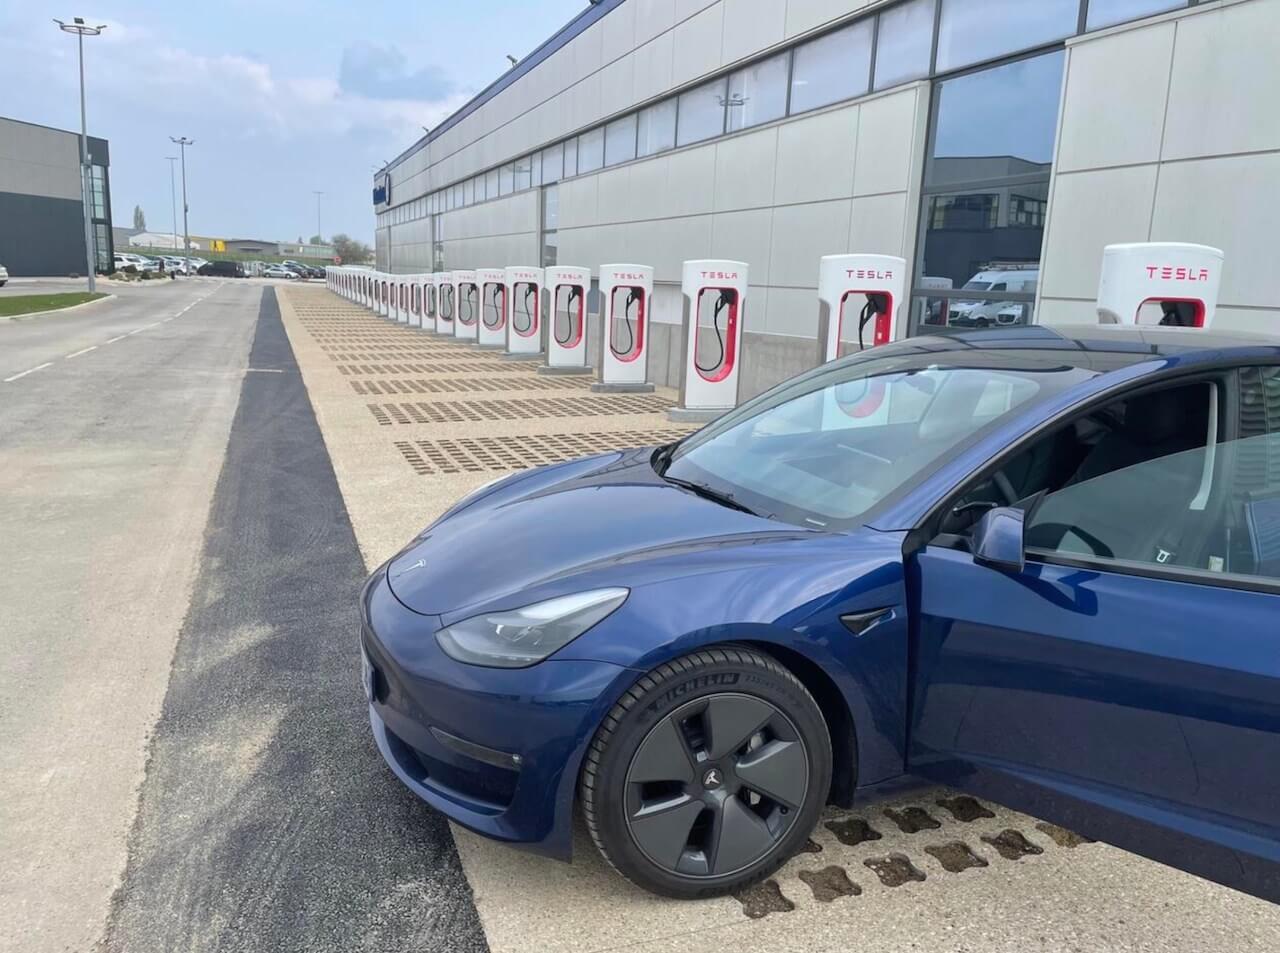 supercharger-in-france00